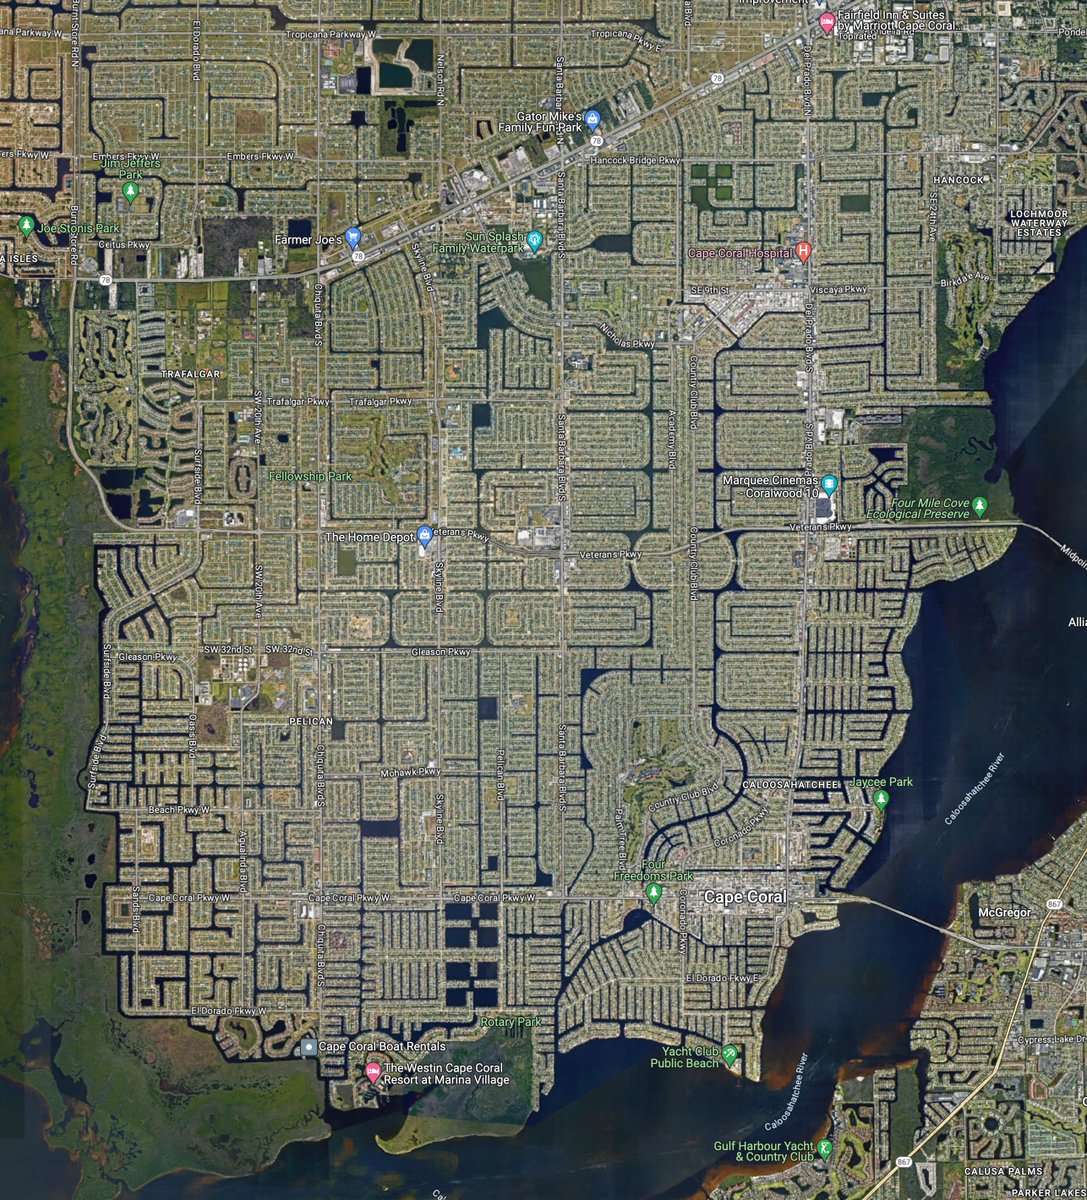 One of the crazy things to me about Florida is that they could have built a literal utopia by creating the Amsterdam of the tropics. Walkability, great weather, clearwater canals, the whole nine yards.

Instead, they chose to build suburbia, but with swamps.